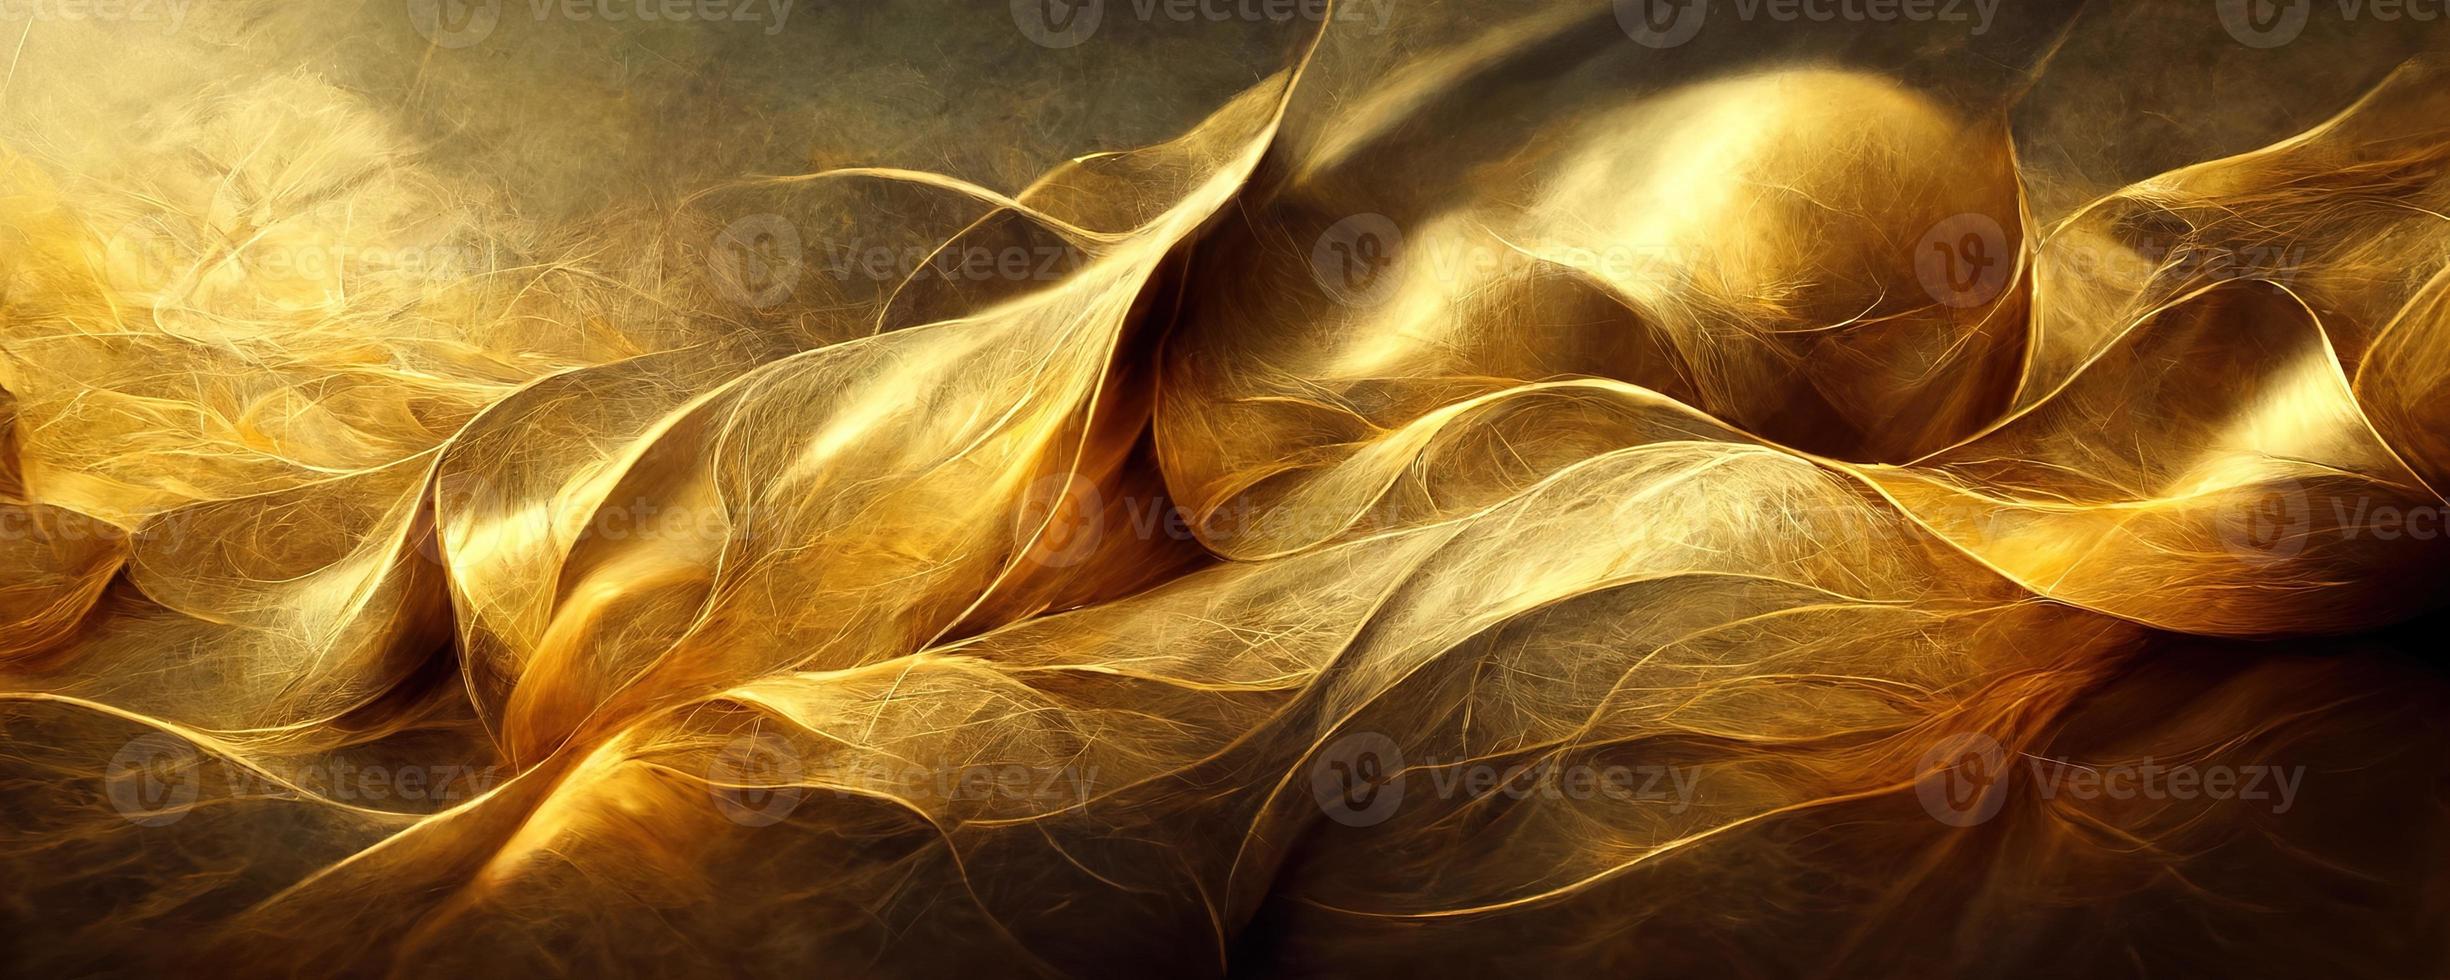 Golden abstract background. Metal wallpaper illustration photo